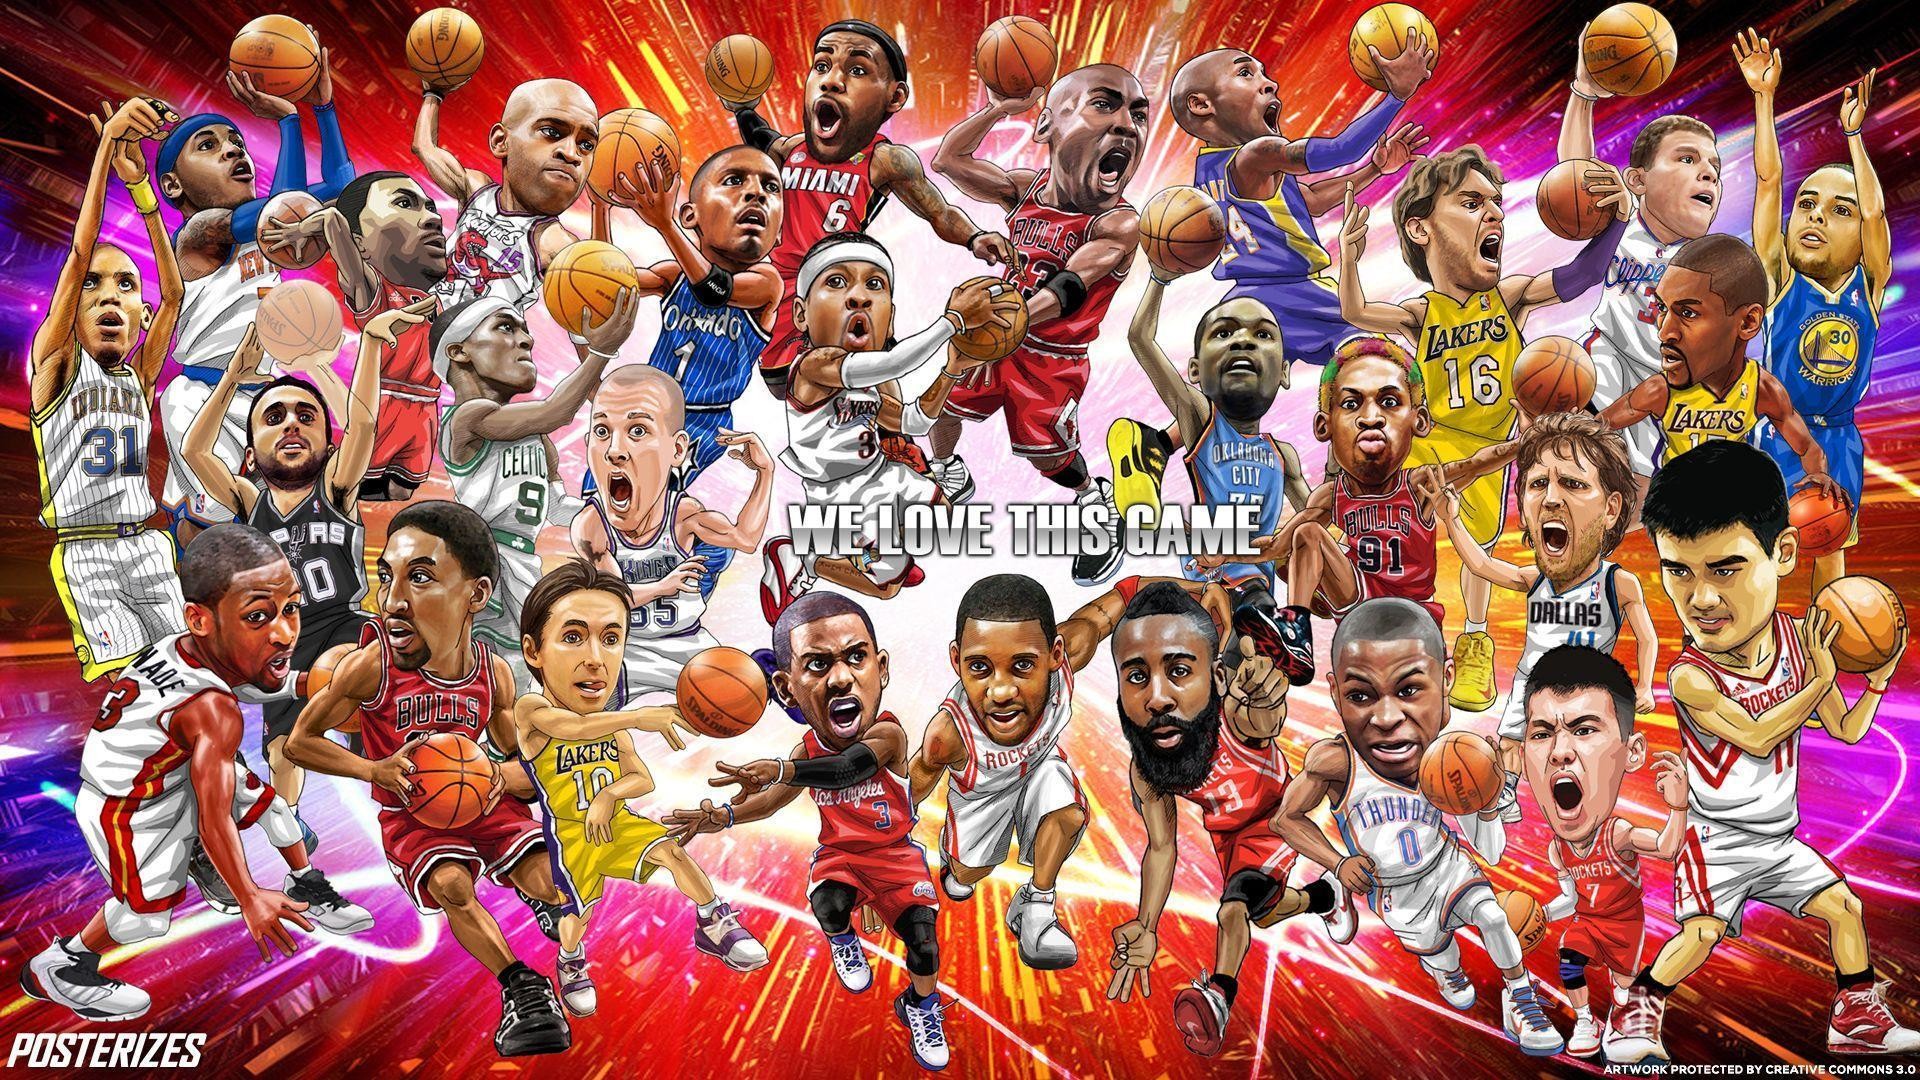 Legends, NBA and Wallpapers on Pinterest